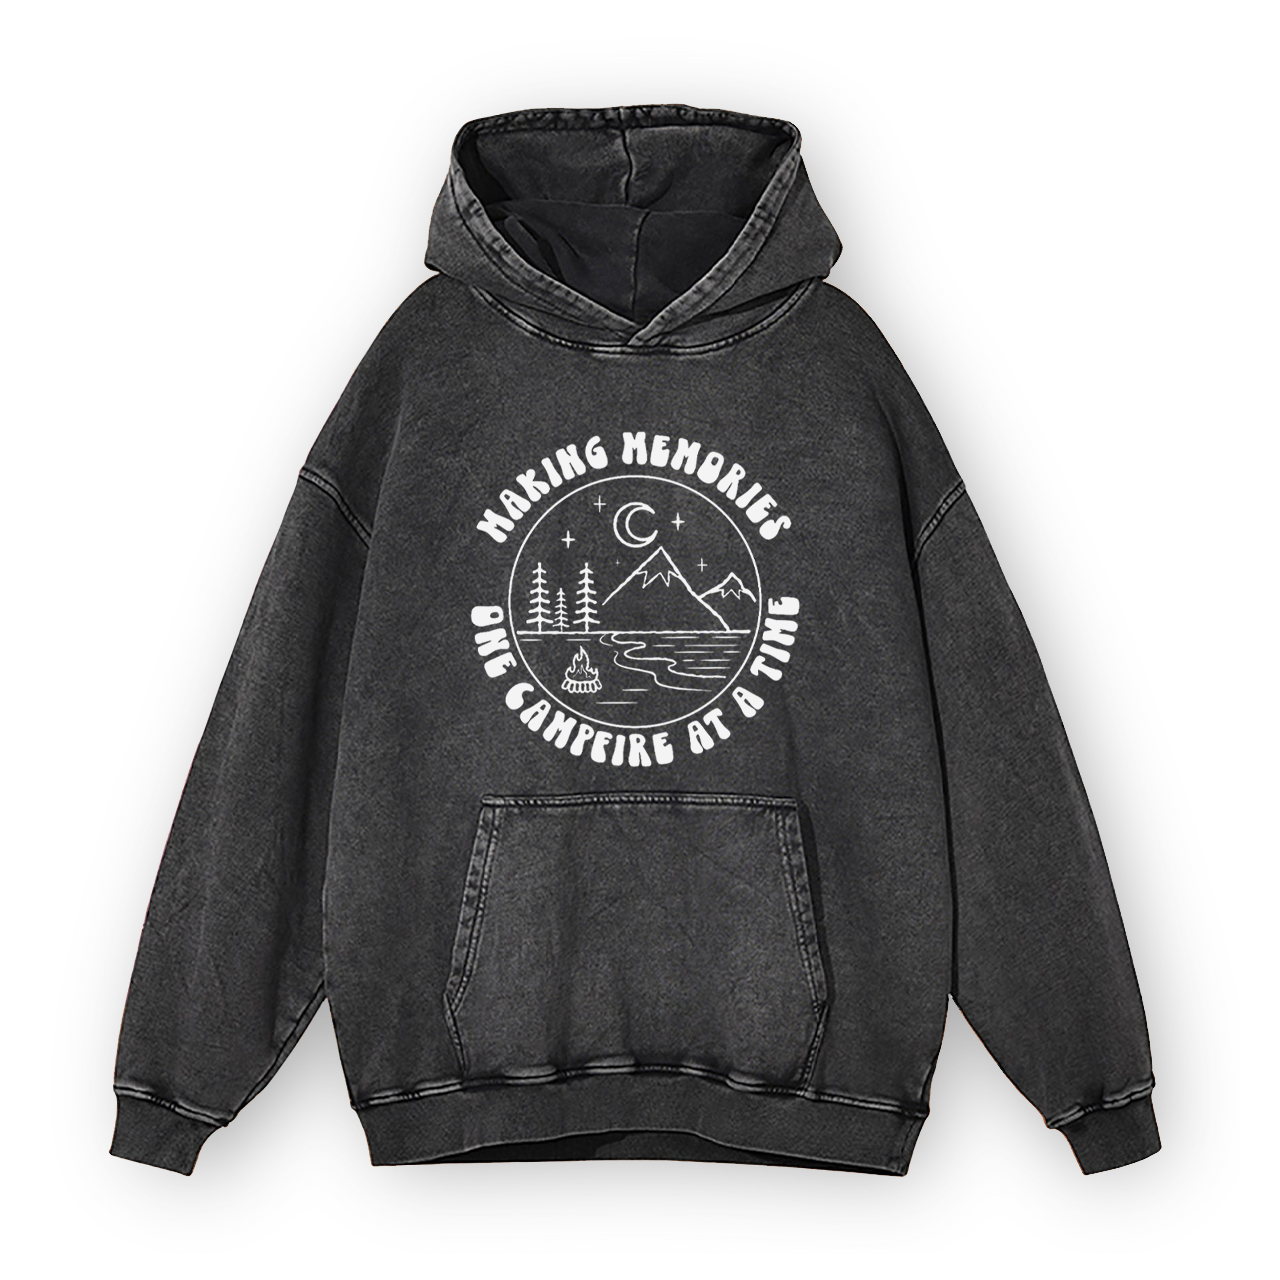 Making Memories One Campfire at a Time Garment-Dye Hoodies